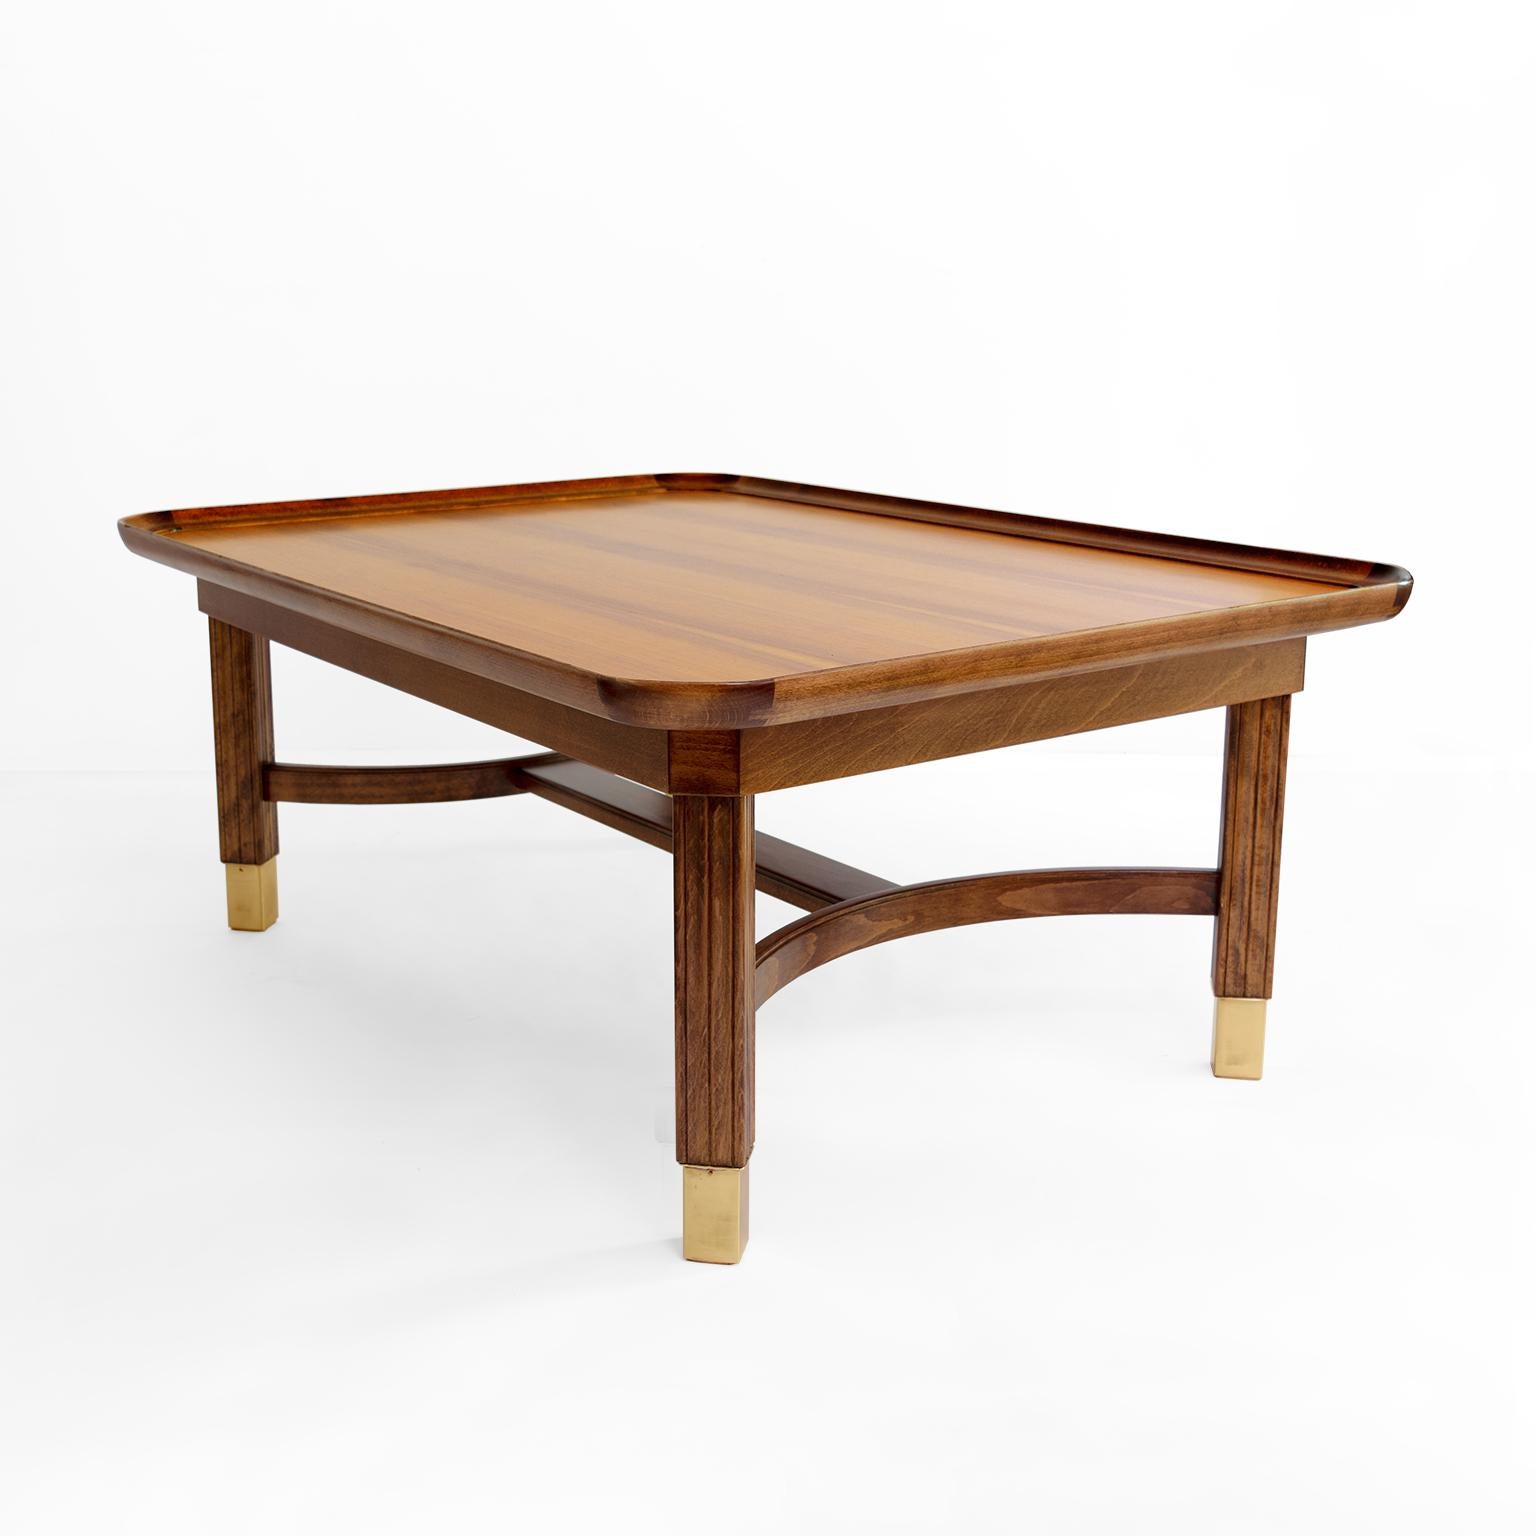 Ferdinand Lundqvist coffee table made in Göteborg, Sweden, circa 1956. Designed exclusively for the luxury liner “Gripsholm” of the Swedish American Line. The rectangular top is in walnut, the frame and carved legs and upper frame in stained beech